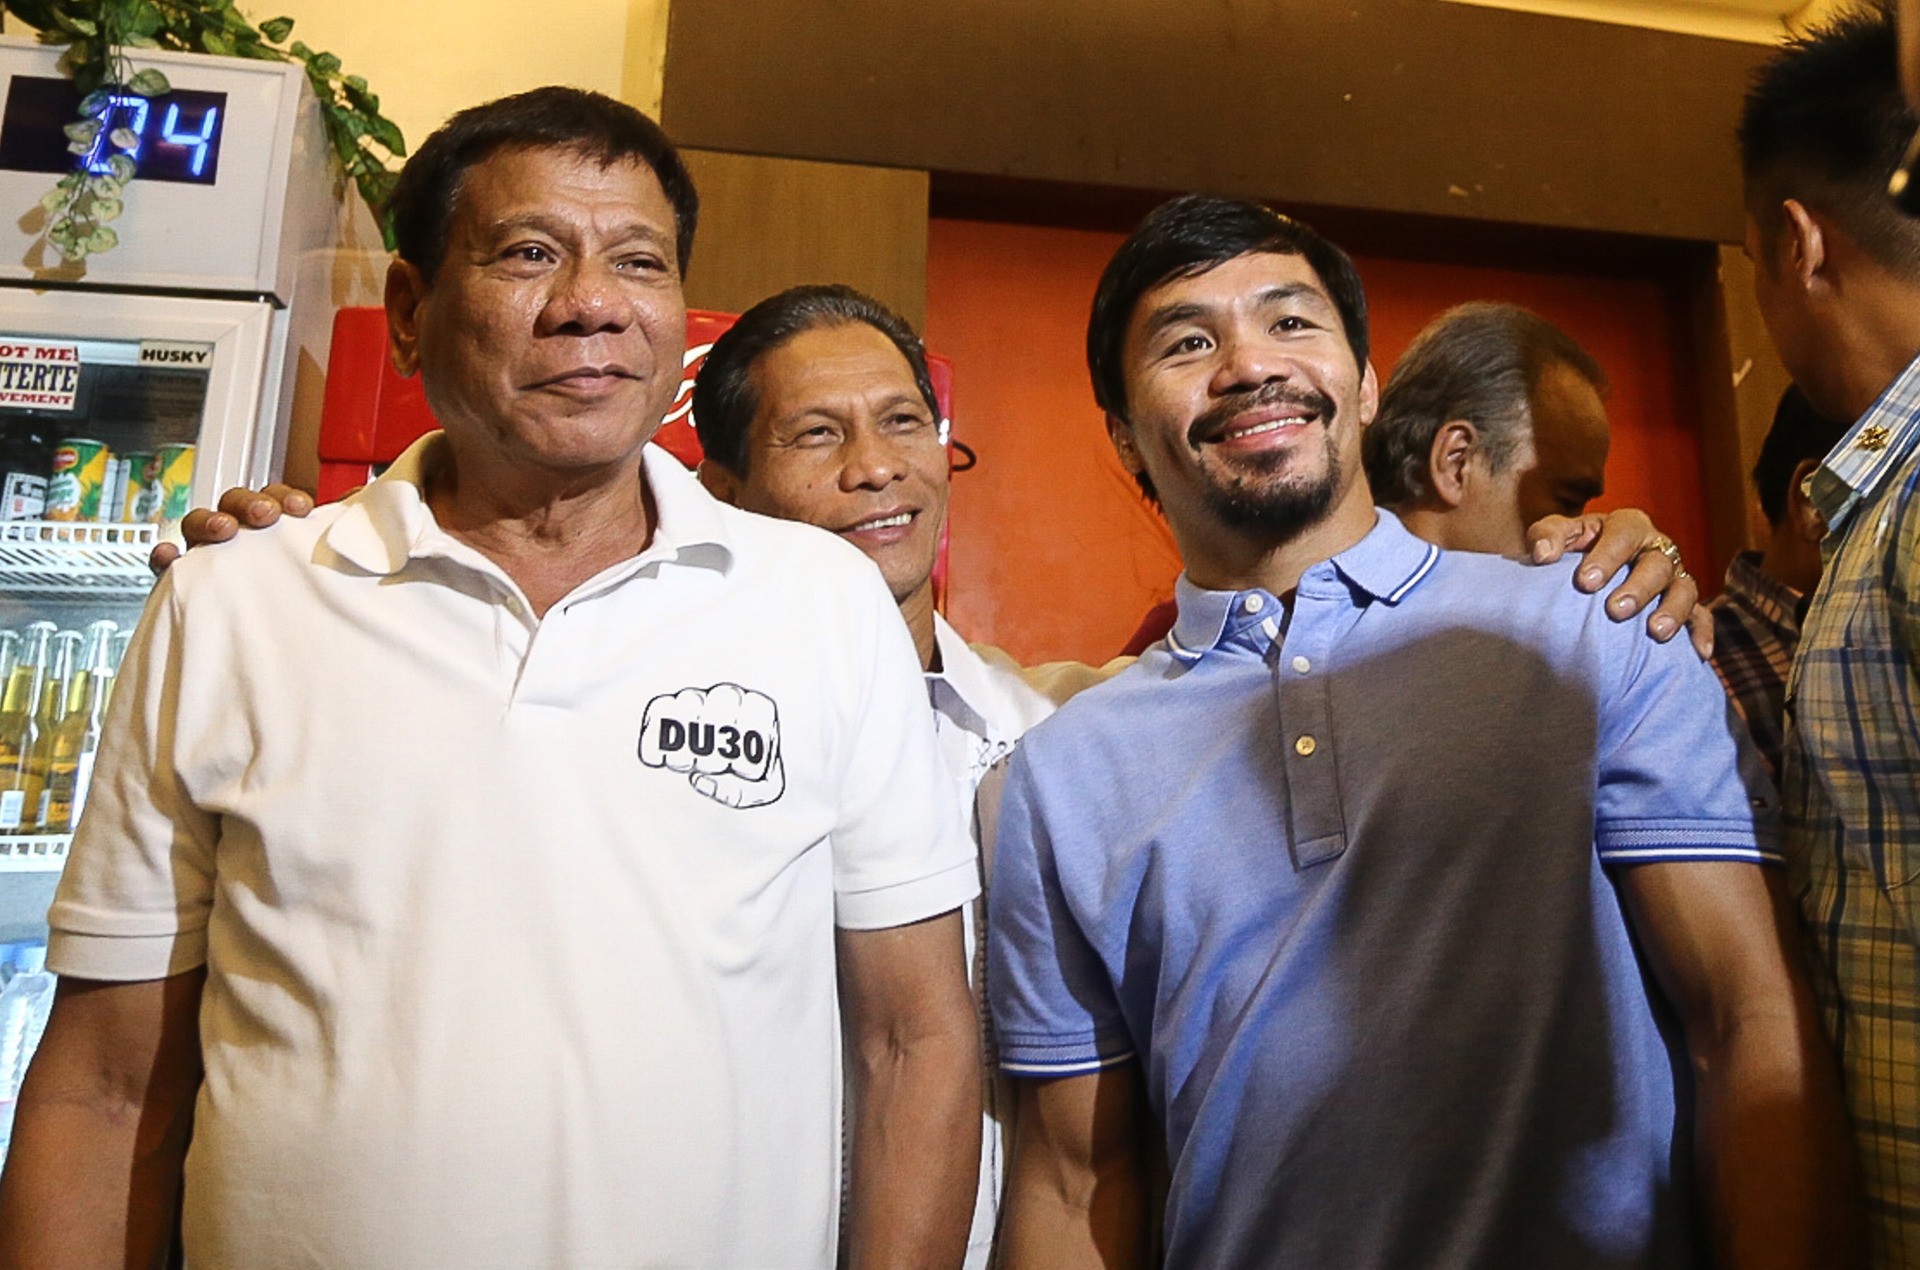 Philippines' President-elect Rodrigo Duterte (L) stands beside boxing icon and newly elected Senator Manny Pacquiao (R) at a meeting in Davao in southern island of Mindanao on May 28, 2017. Philippine police shot dead four suspected drug dealers while unknown men gunned down two others, officials said Saturday, raising the death toll for narcotics suspects to 14 this week after president-elect Rodrigo Duterte vowed a war against crime. / AFP / MANMAN DEJETO (Photo credit should read MANMAN DEJETO/AFP via Getty Images)